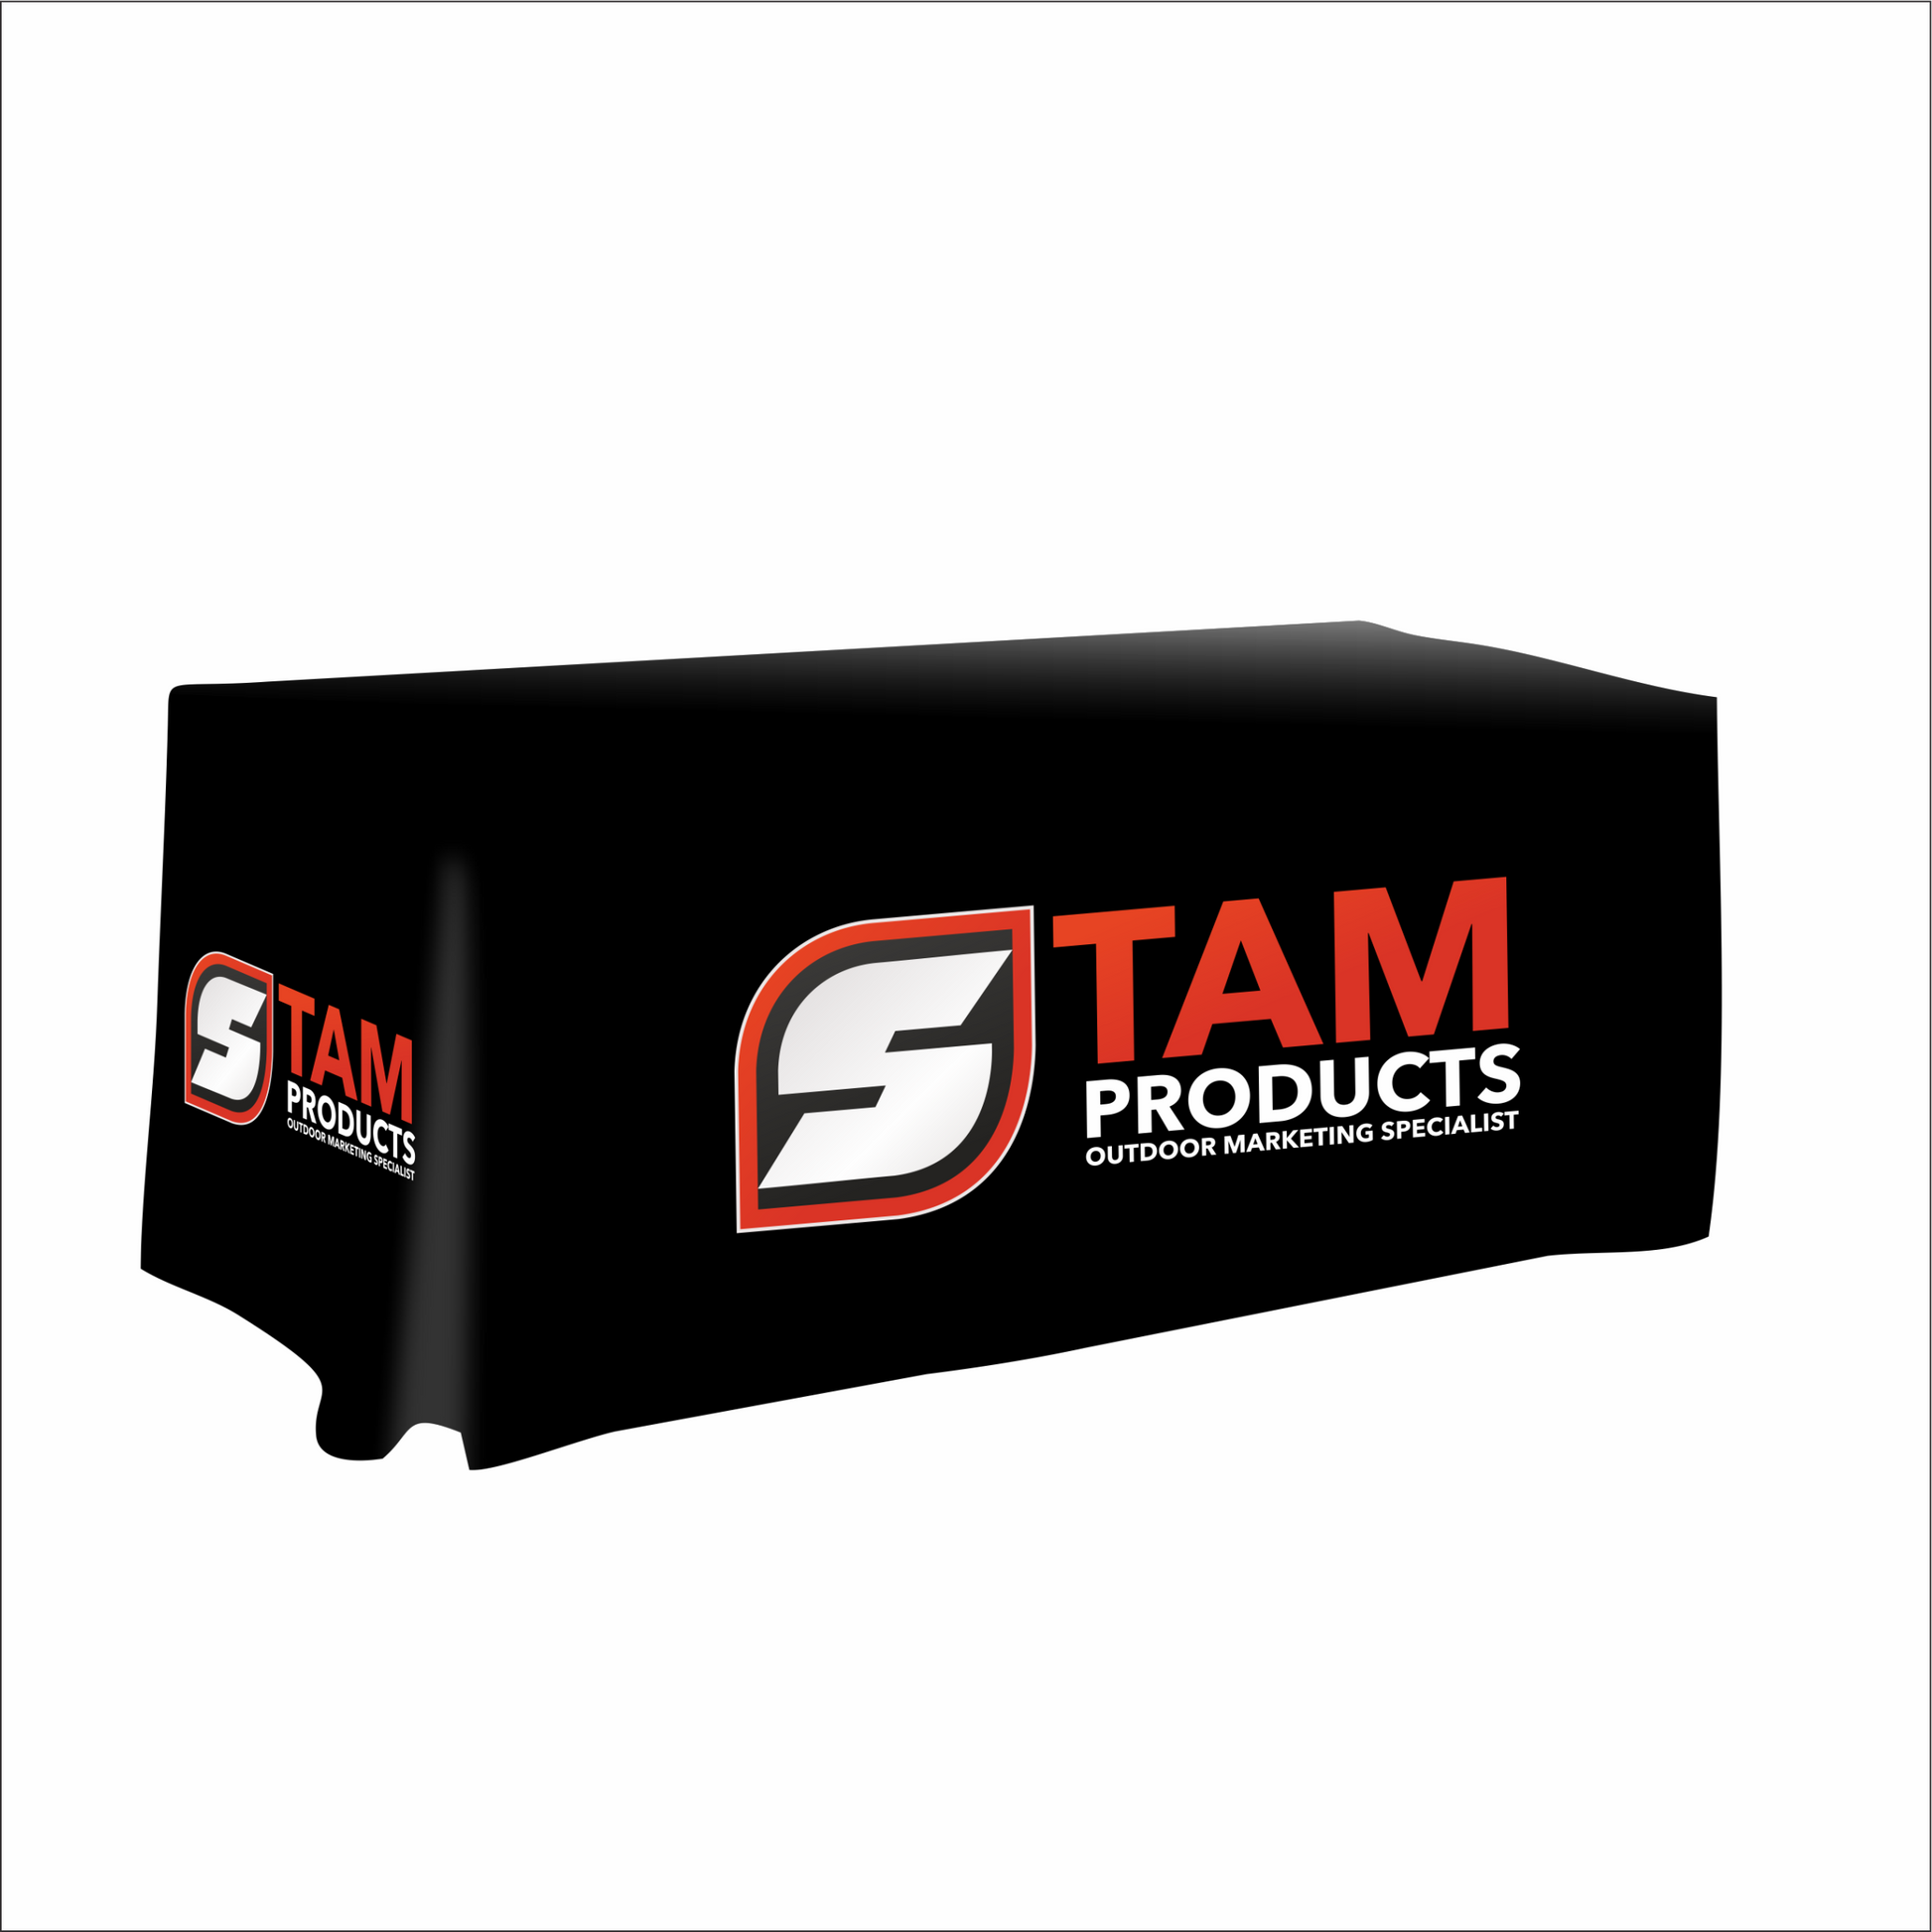 Branded Table cloths